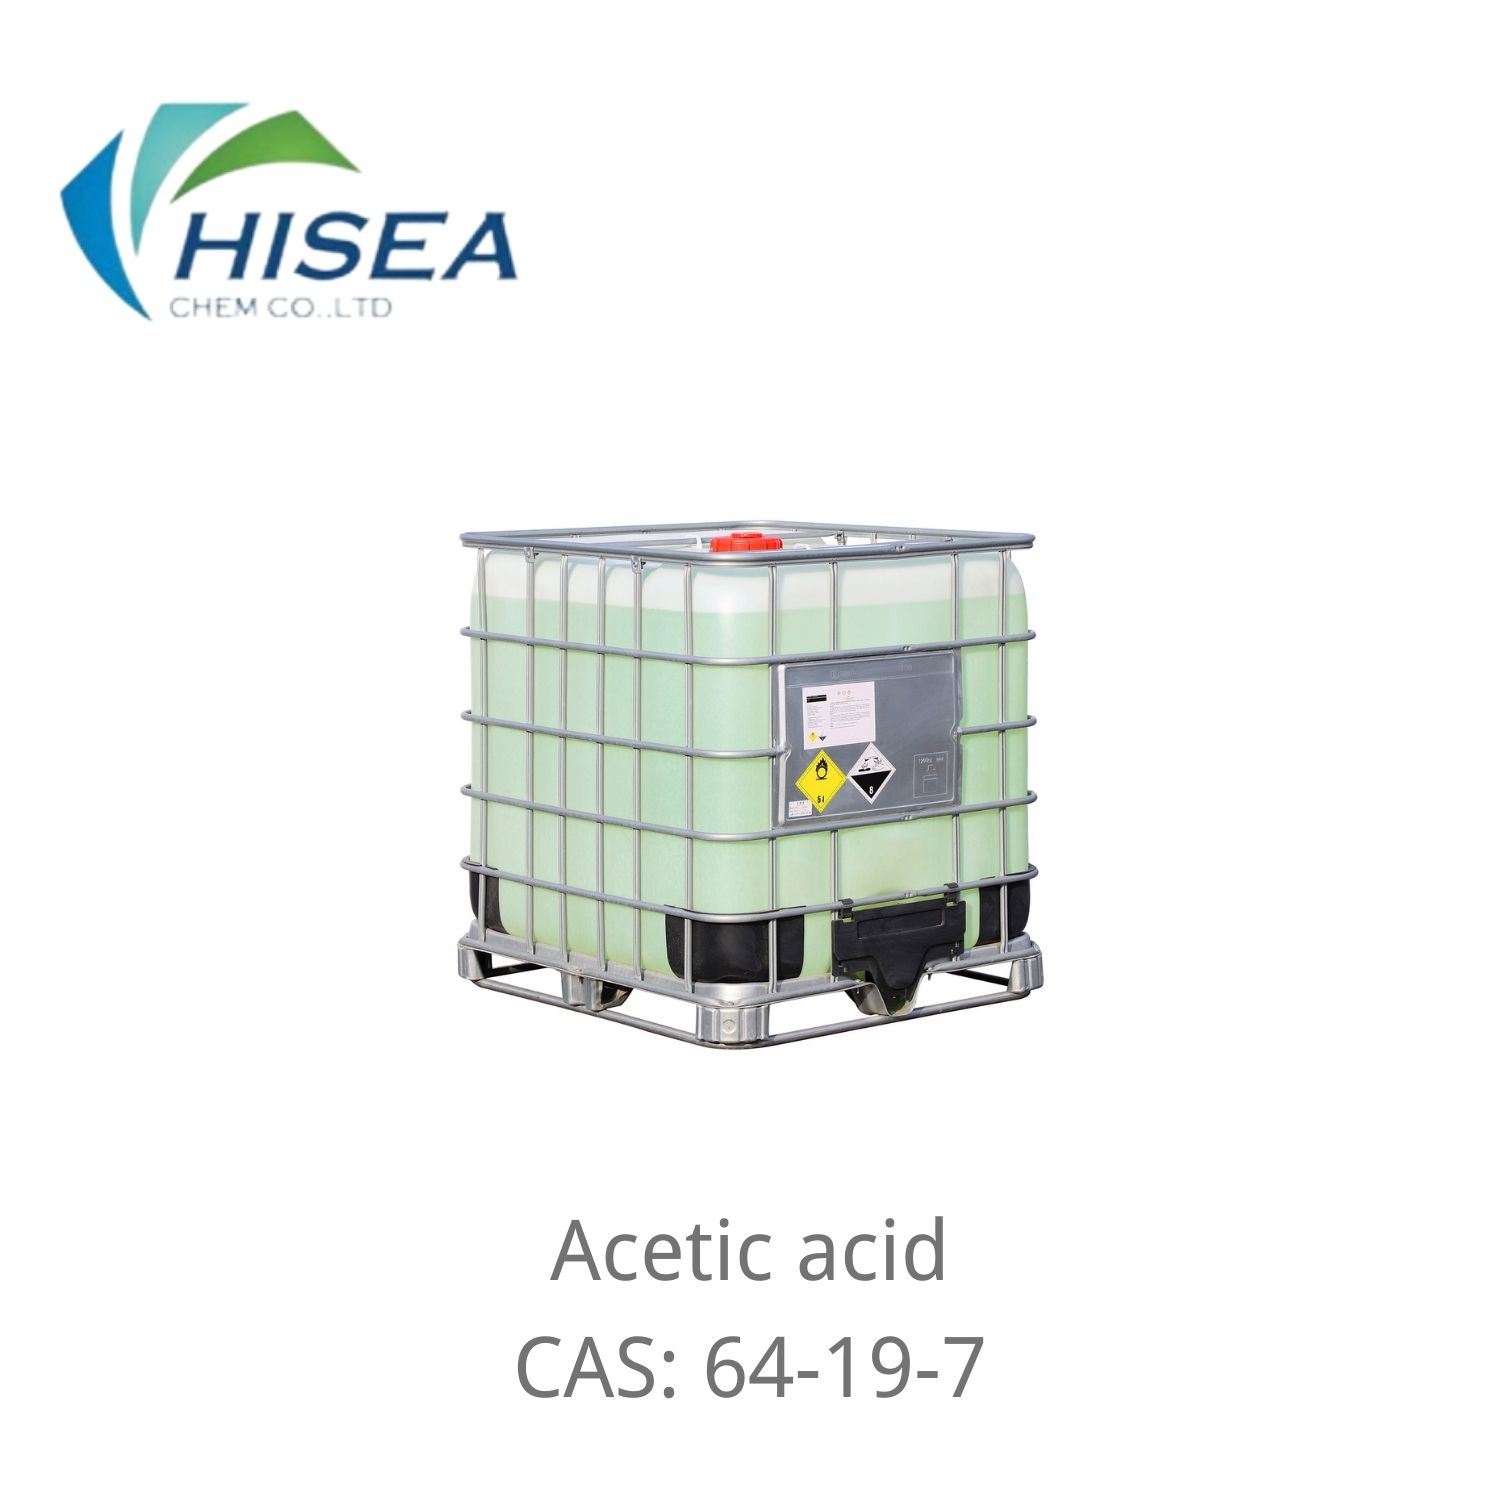 Anhydrous 99% Glacial Acetic Acid For Textile